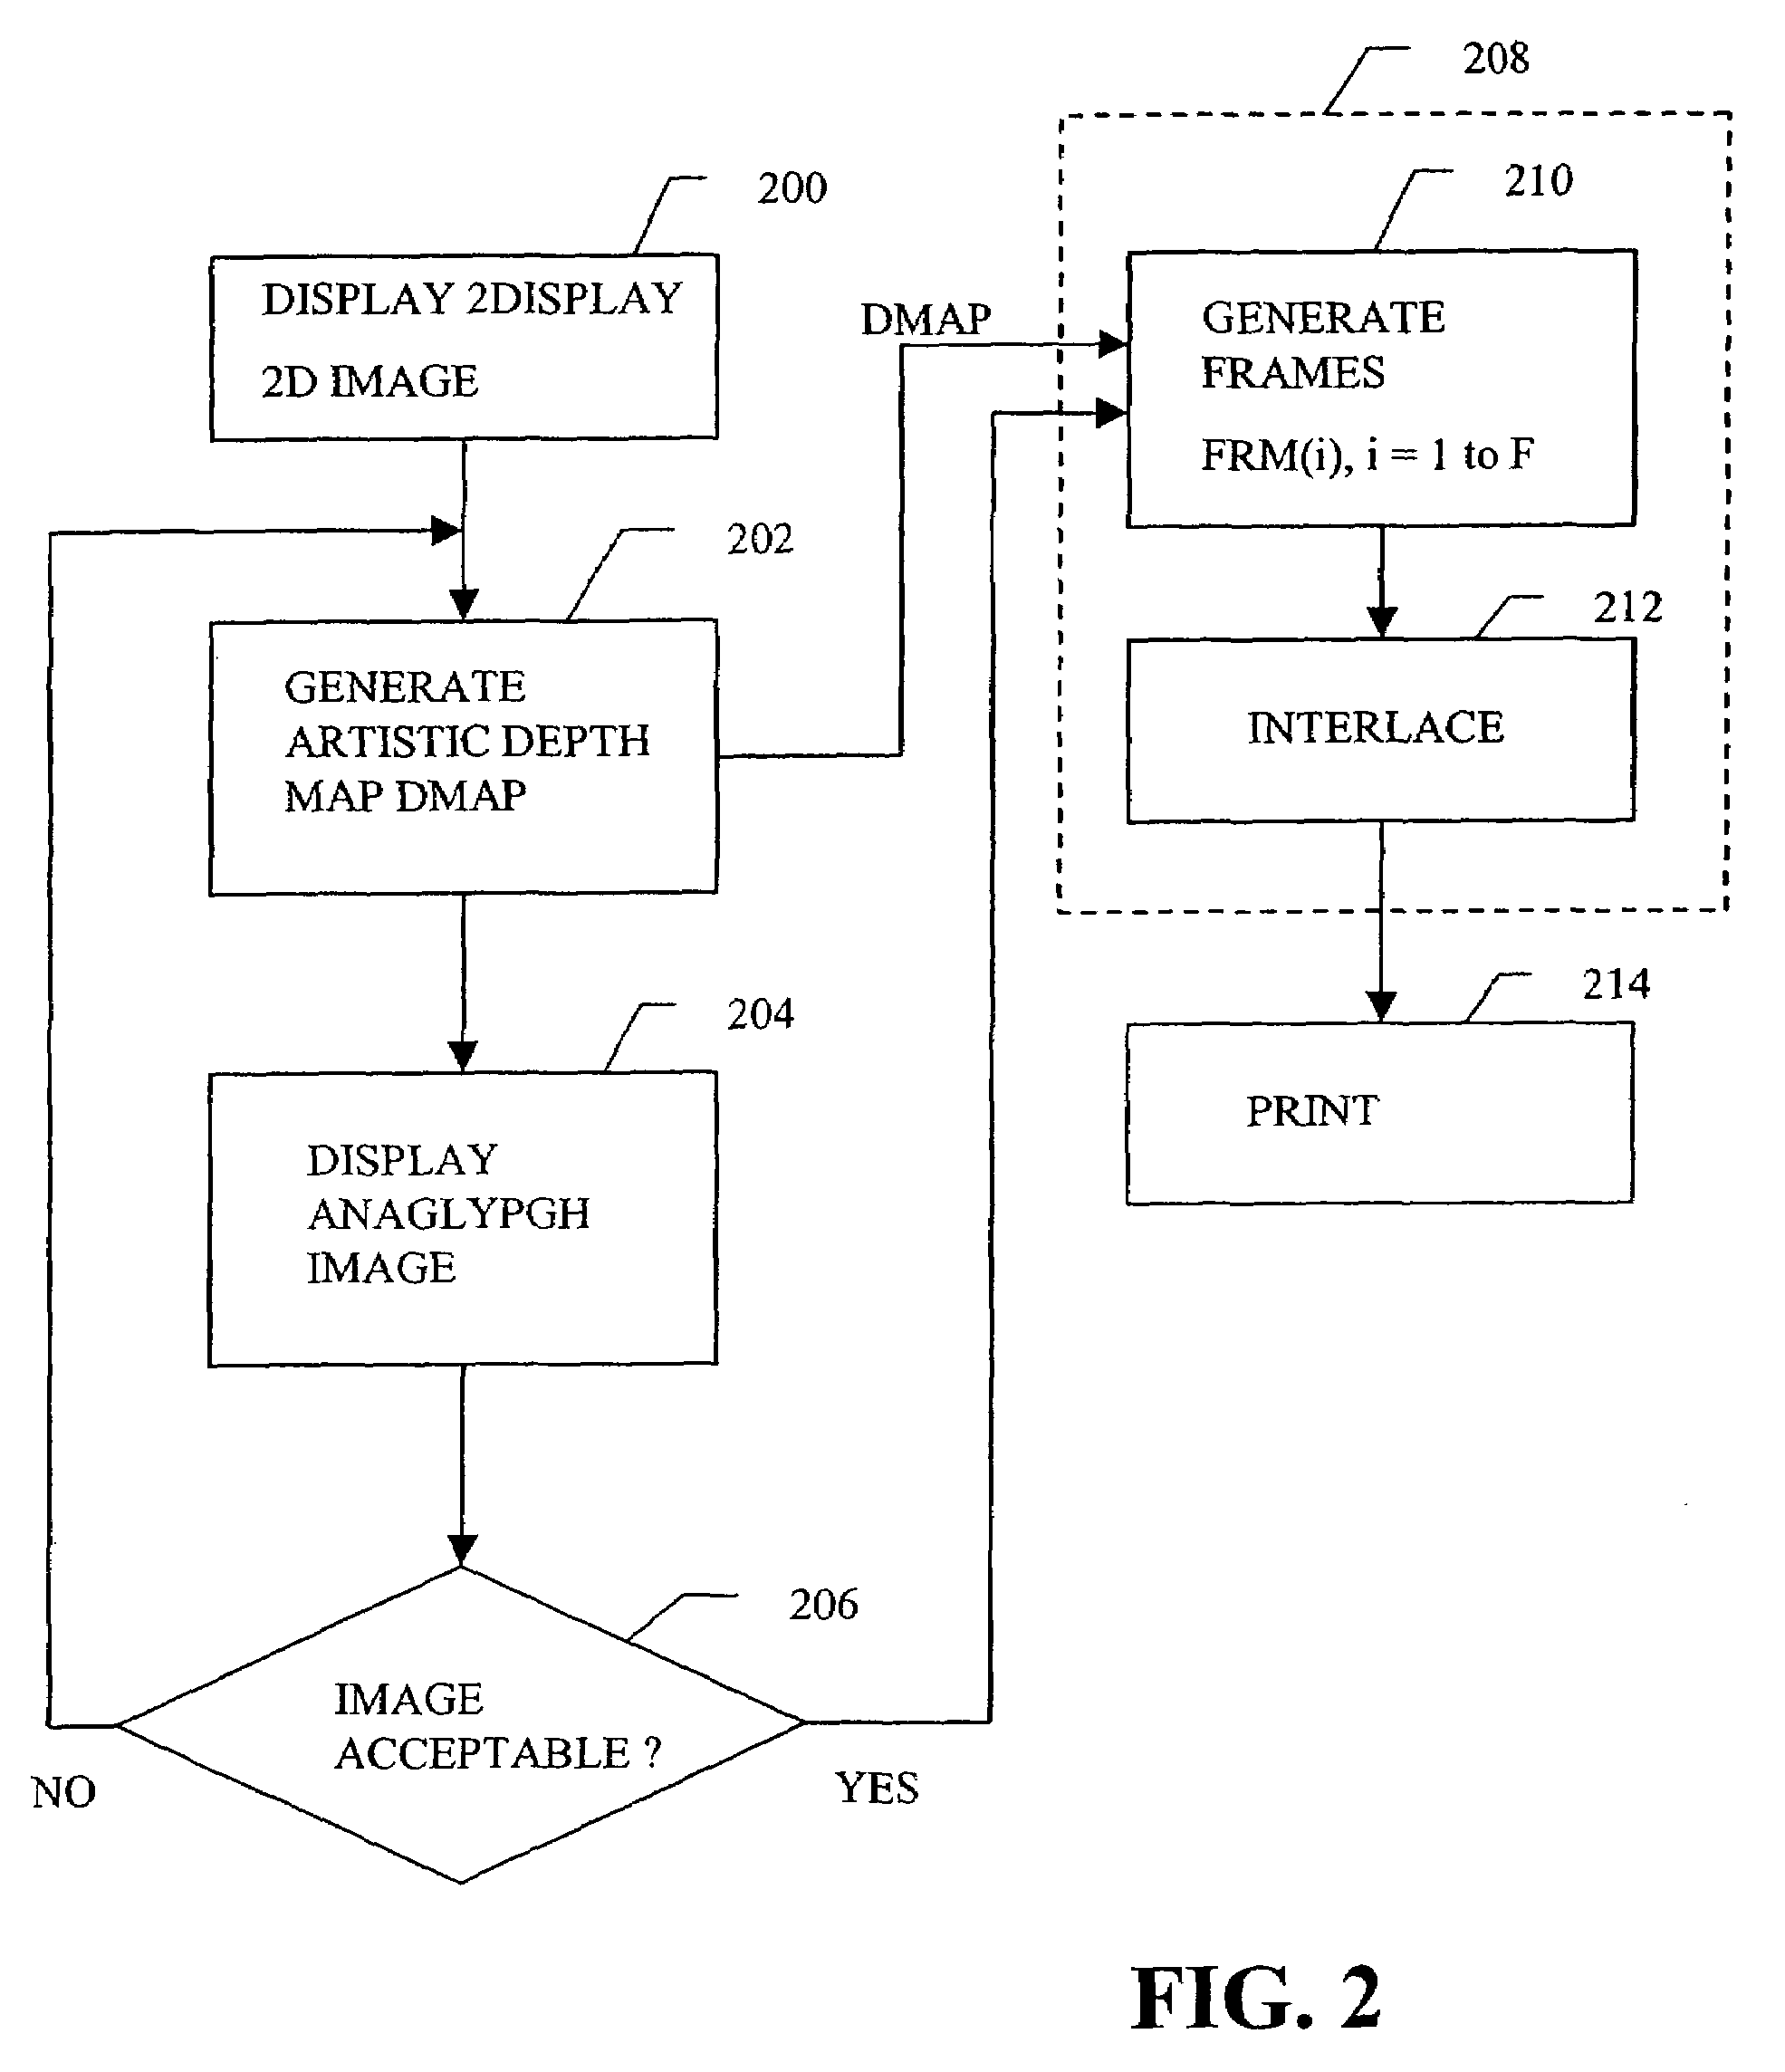 Multi-dimensional images system for digital image input and output